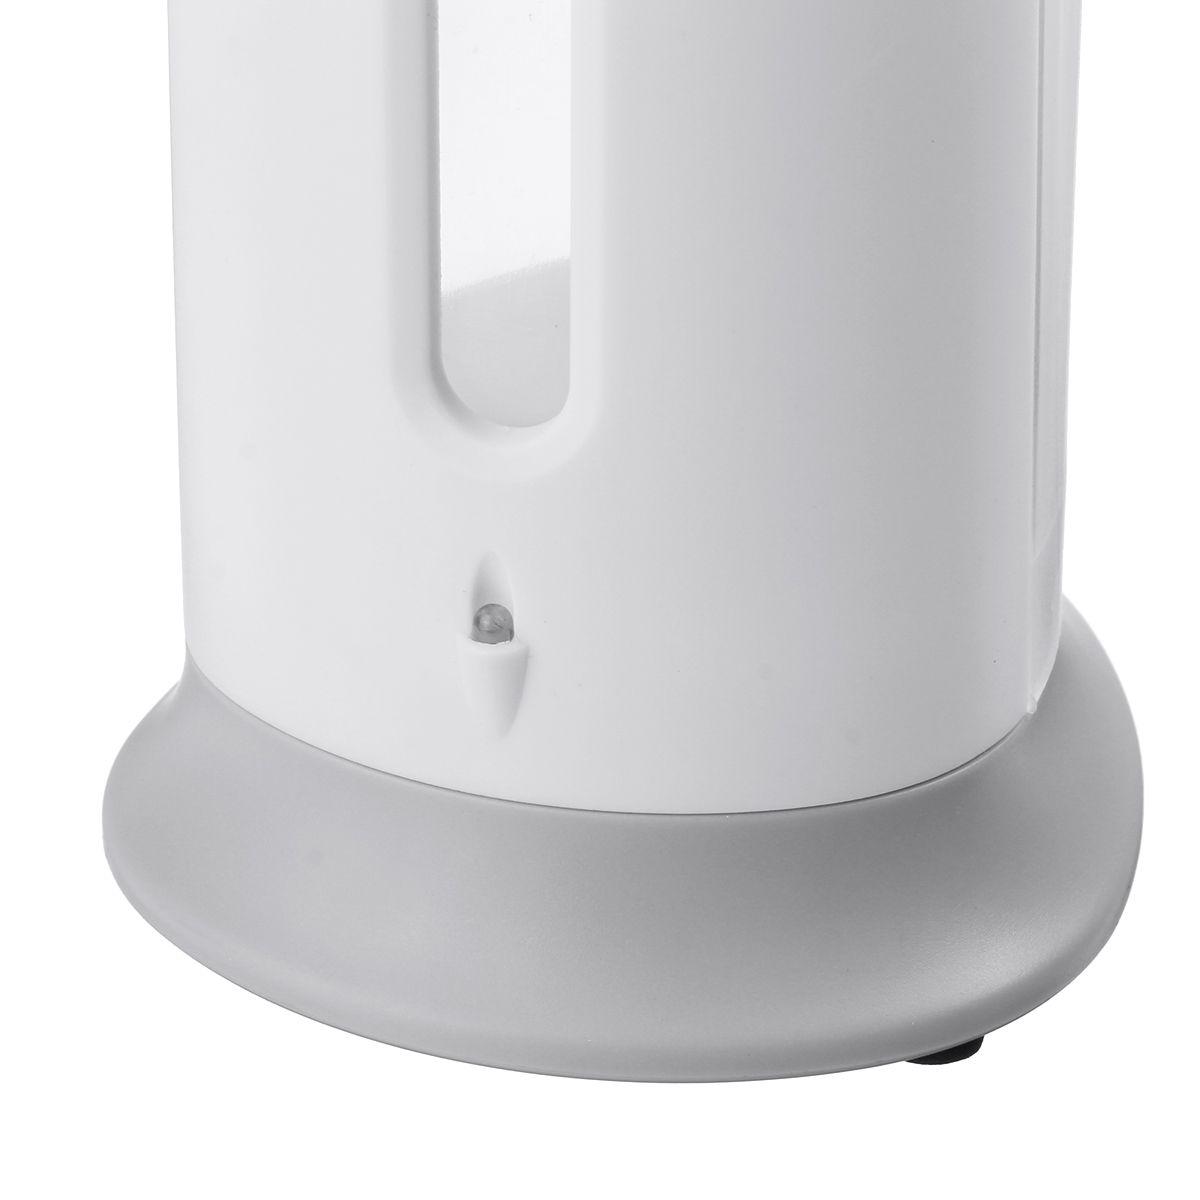 Soap-Dispenser-Automatic-Lotion-Dispenser-Infrared-Sensor-Automatic-No-Touch-1690580